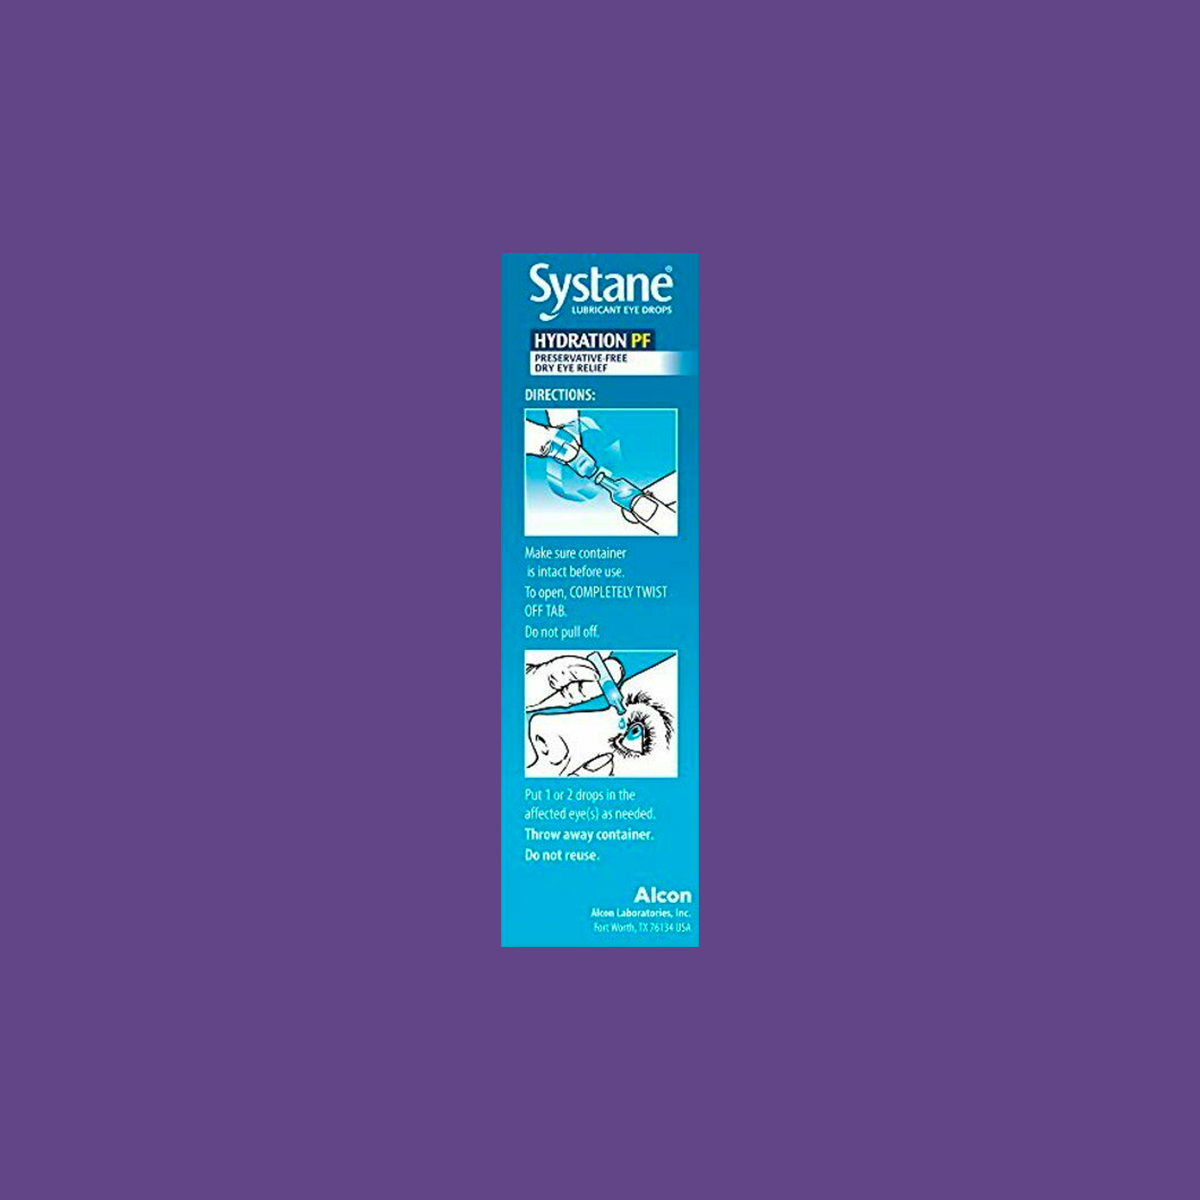 Alcon Systane Hydration Preservative-Free Lubricant Eye Drops 30ct Vials, 30 Count